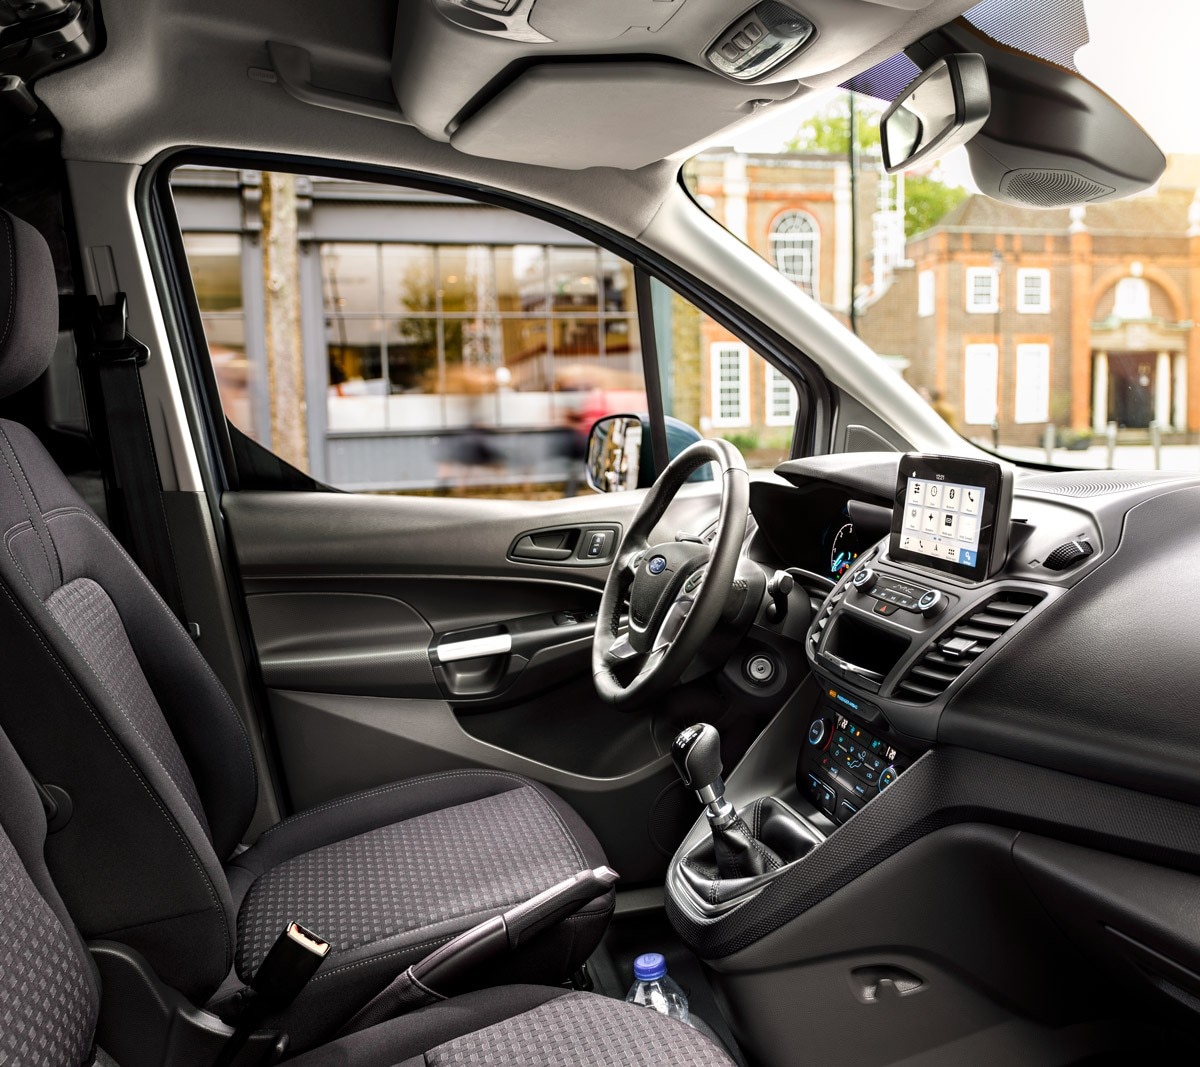 Ford Transit Connect interior